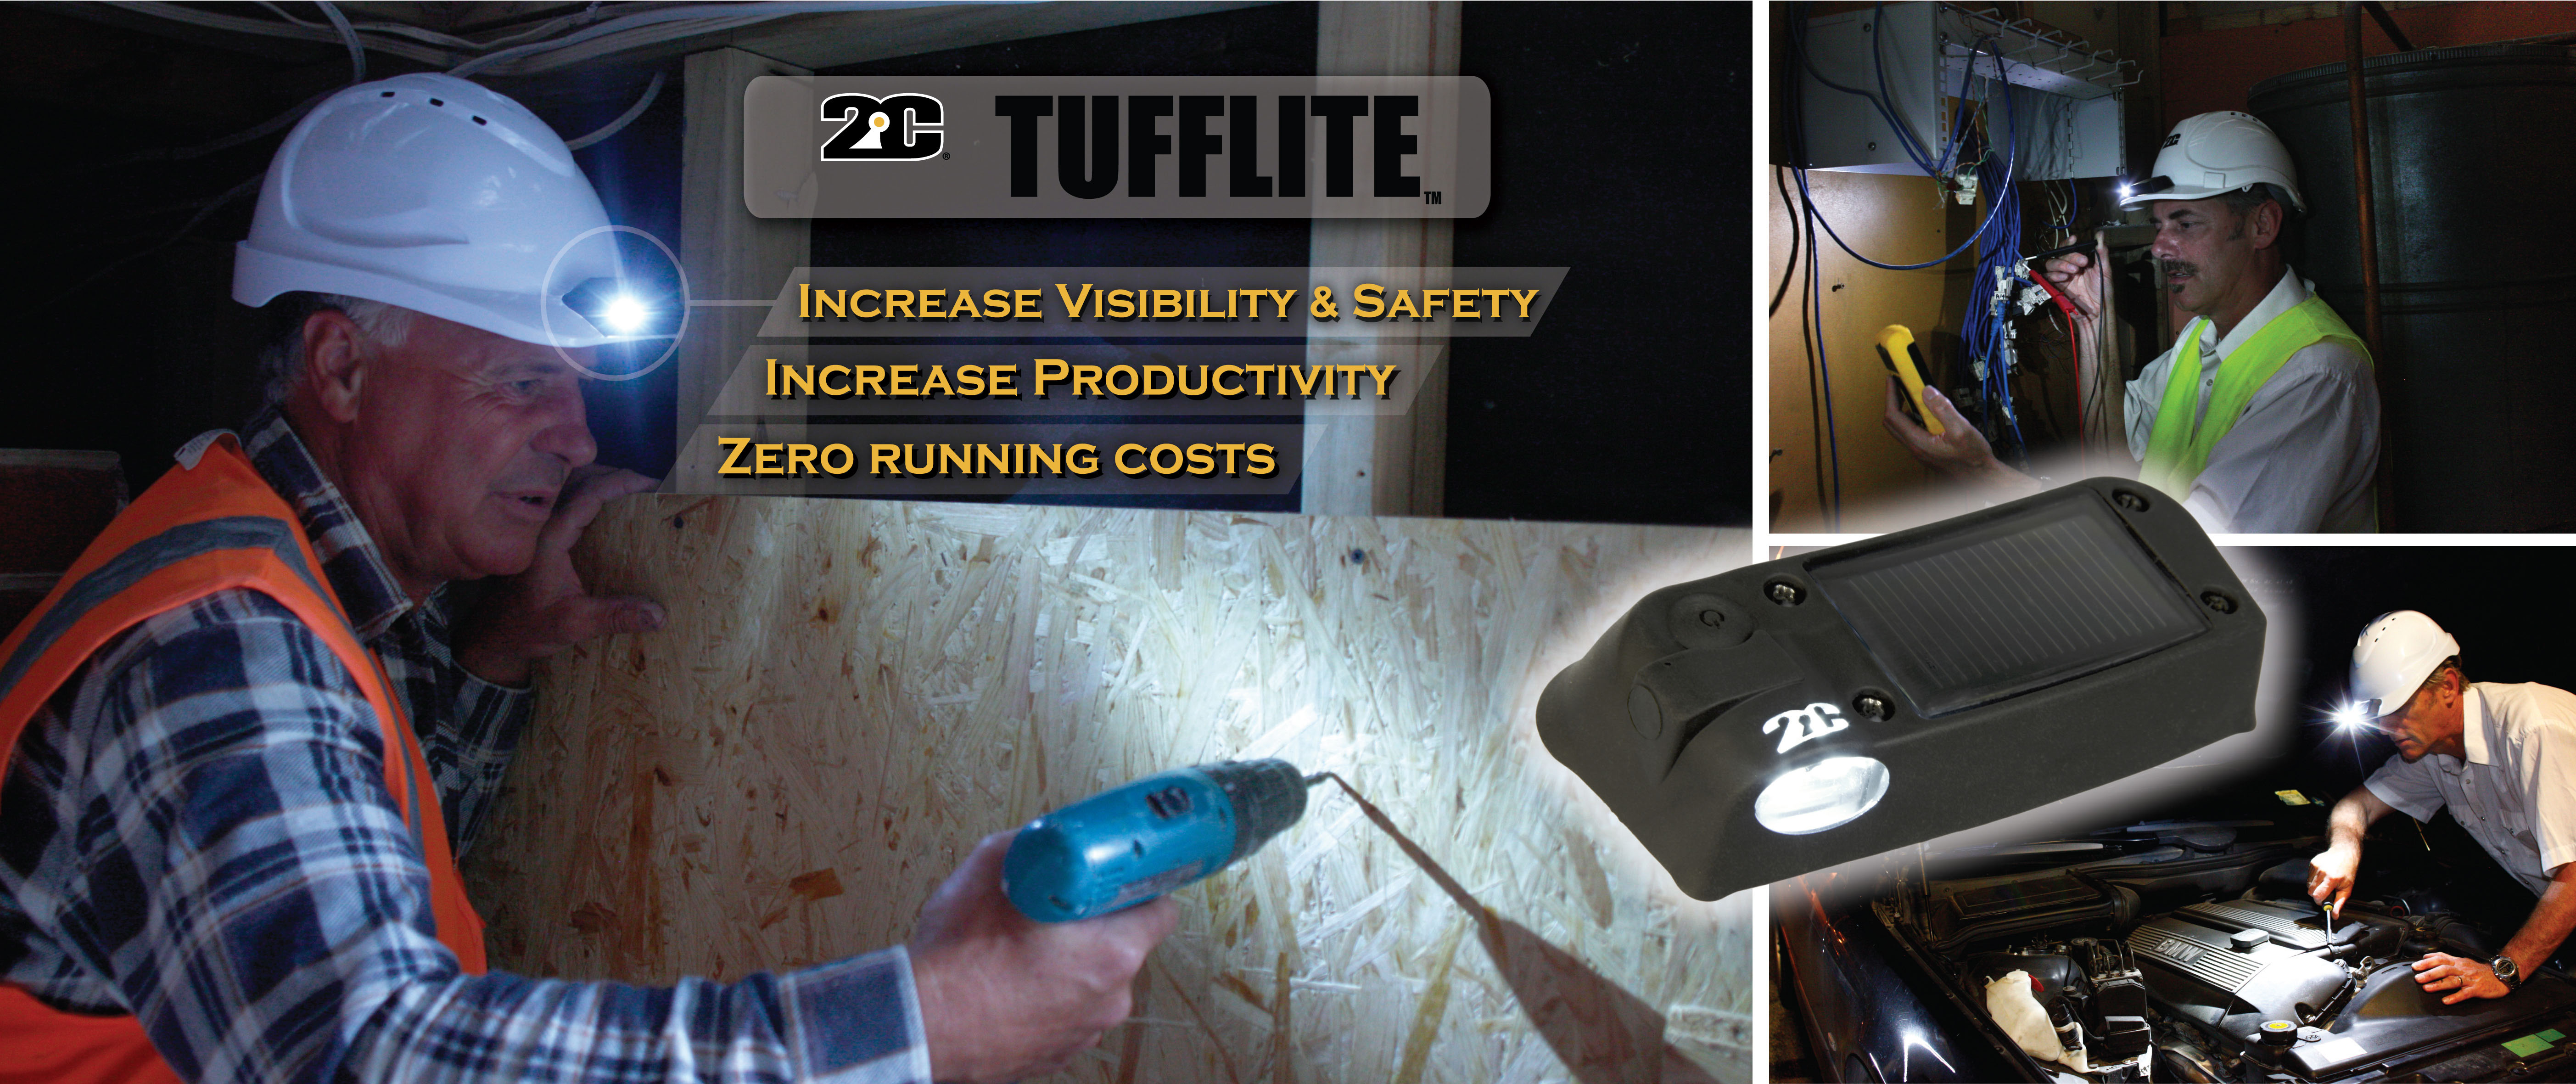 2C TuffLite - increase safety and productivity